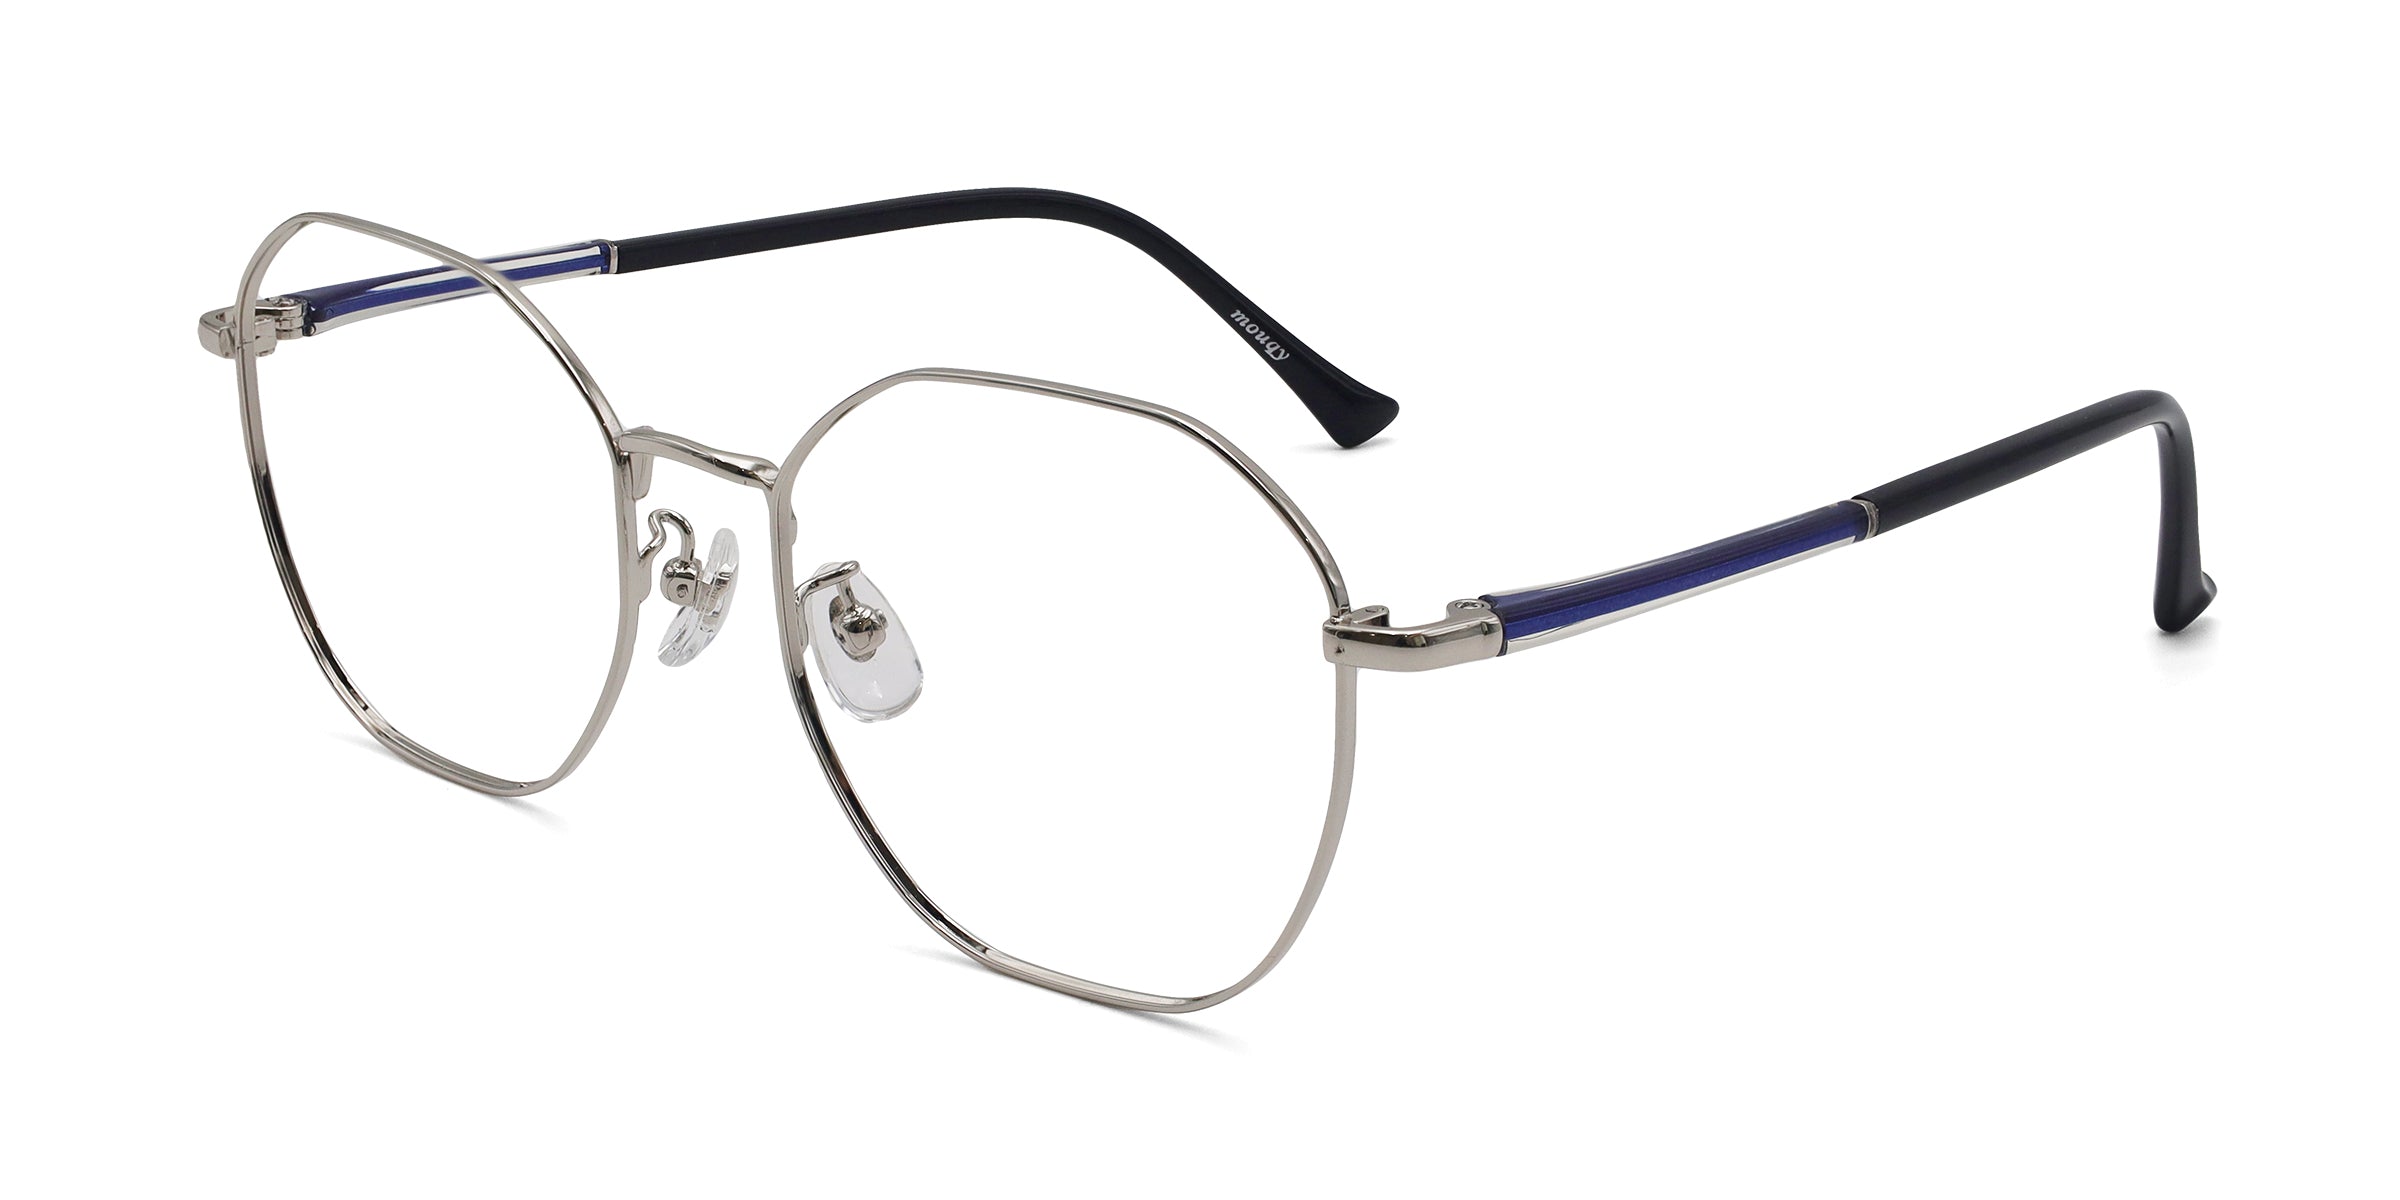 march geometric silver eyeglasses frames angled view